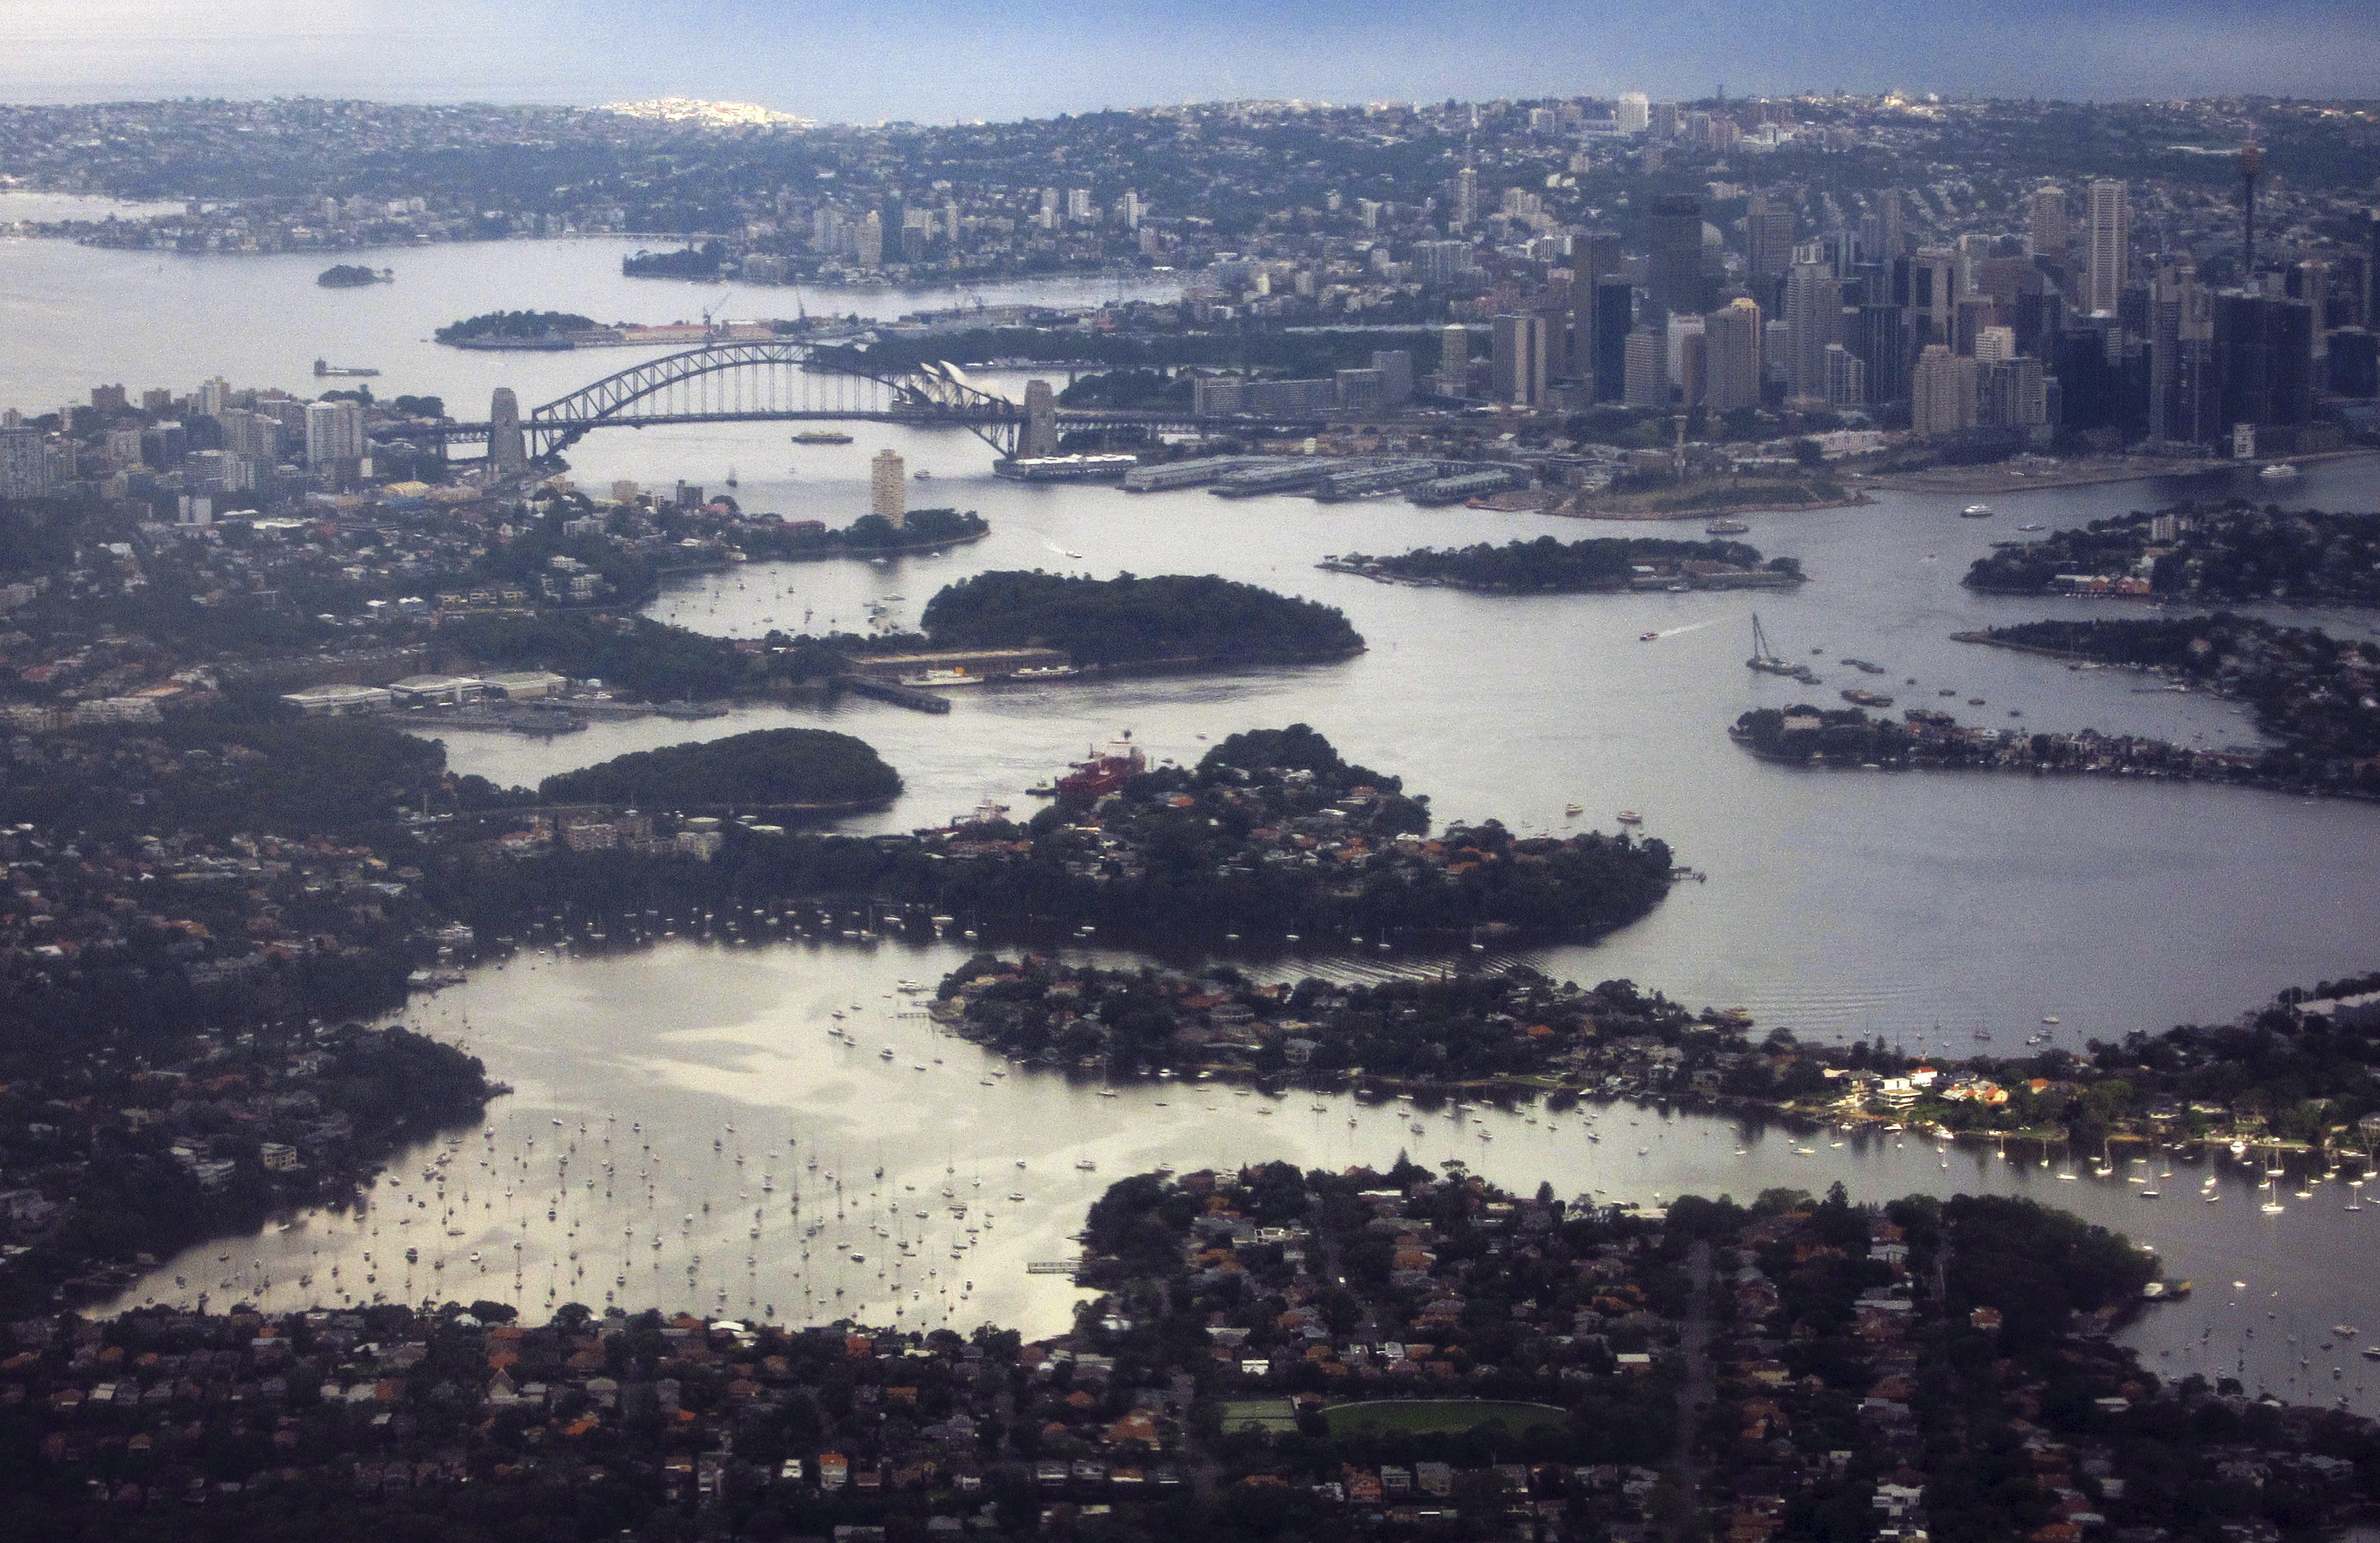 Aerial picture shows Sydney Harbour Bridge and Central Business District behind houses along the foreshore of Sydney Harbour